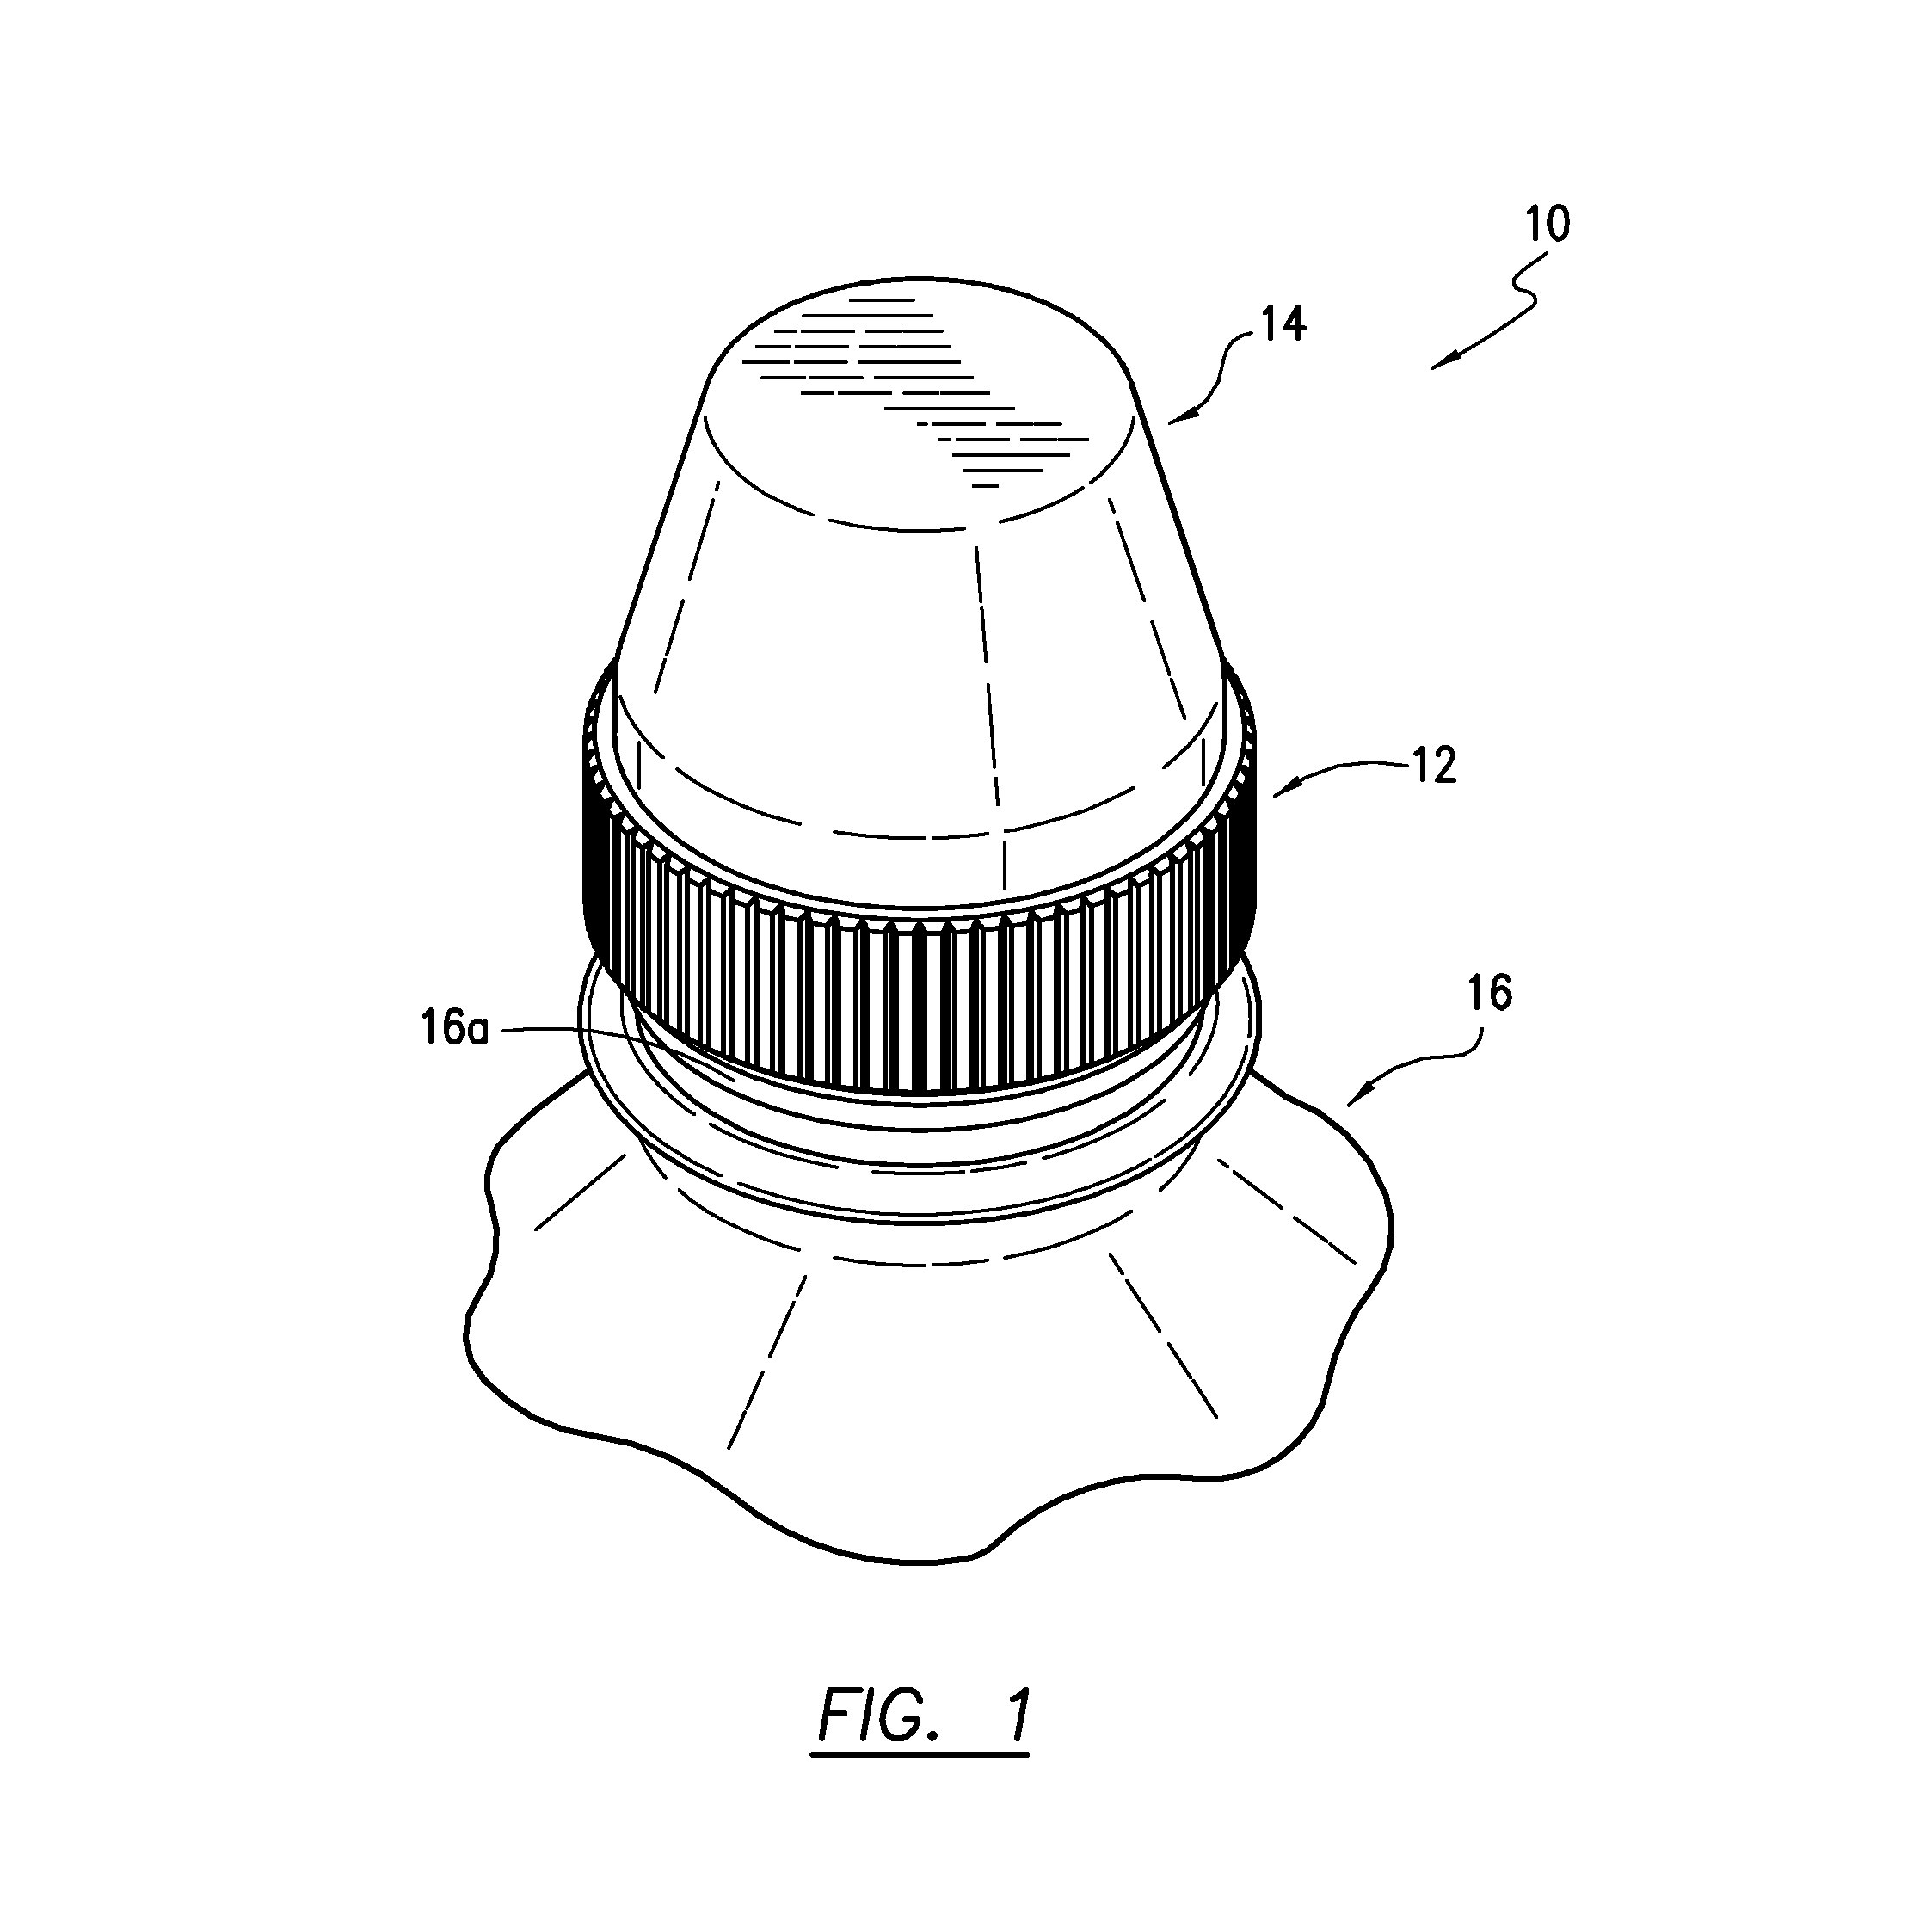 Ingredient dispensing cap for mixing beverages with push-pull drinking spout